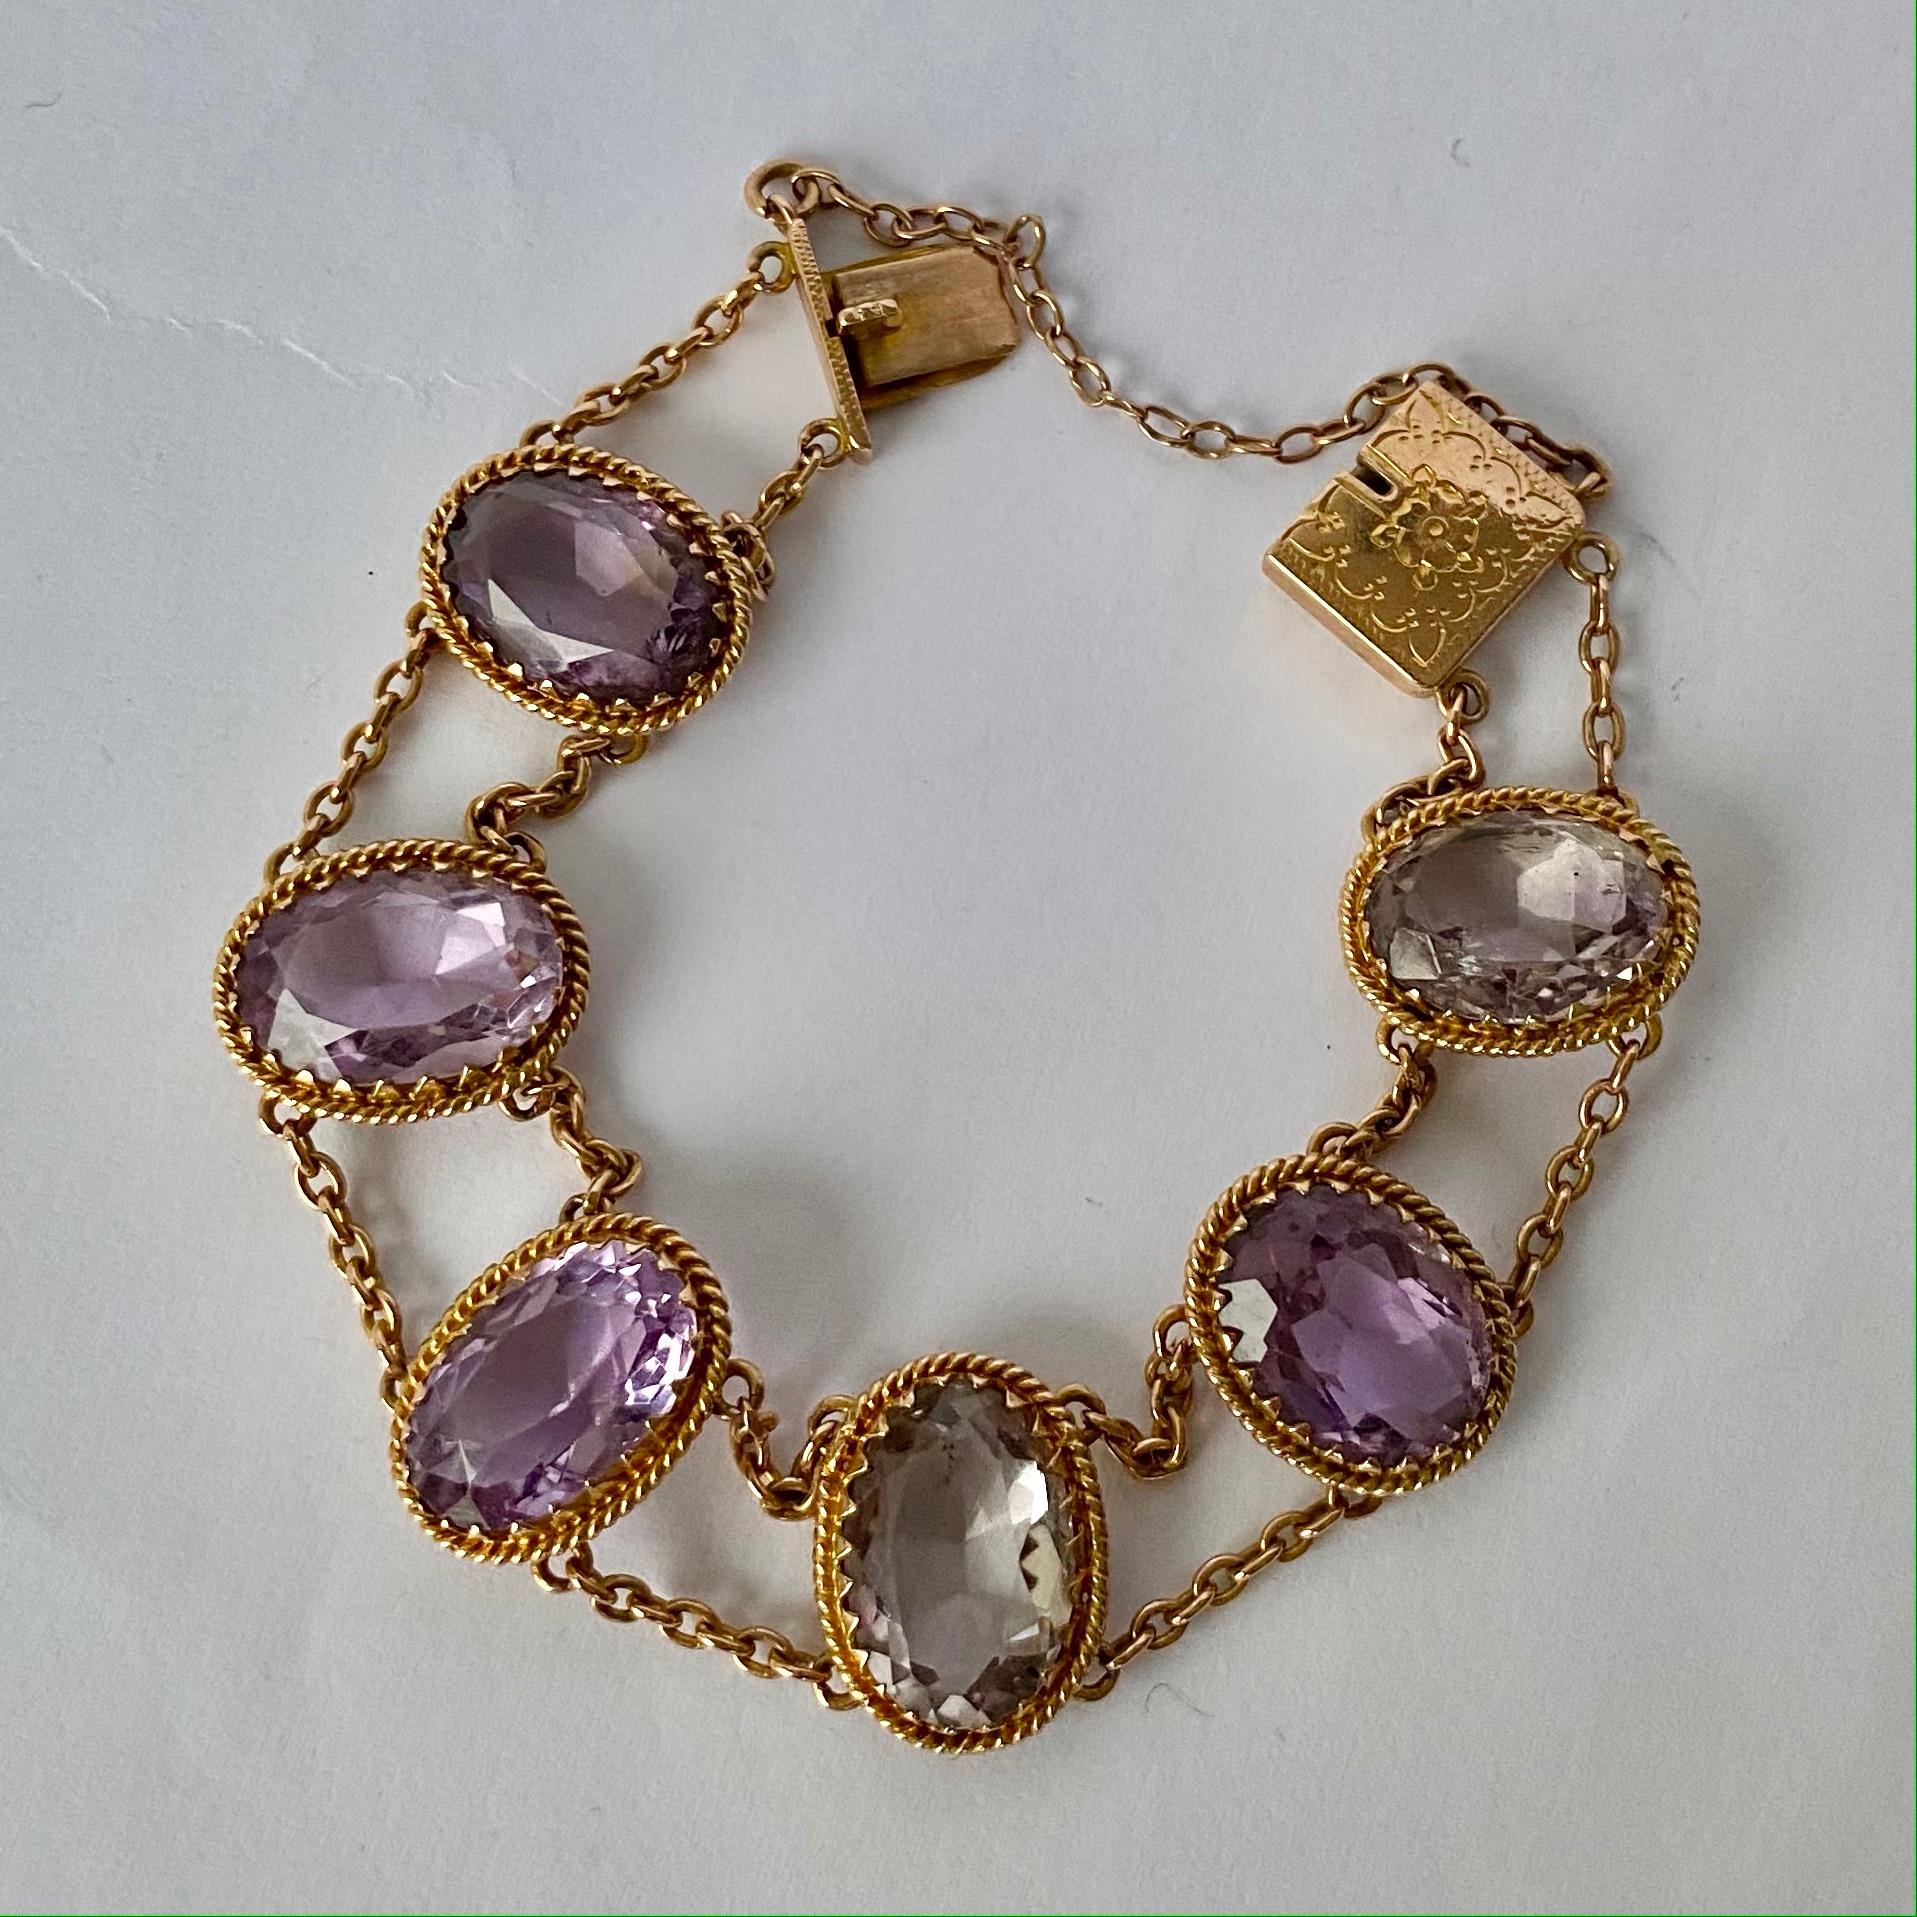 Such a decorative piece! This bracelet is made up of six amethyst stones. The decorative 9ct gold clasp with engraving finishes this bracelet off perfectly.

Length: 16cm
Stone Dimensions: 14x9mm

Weight: 16.2g